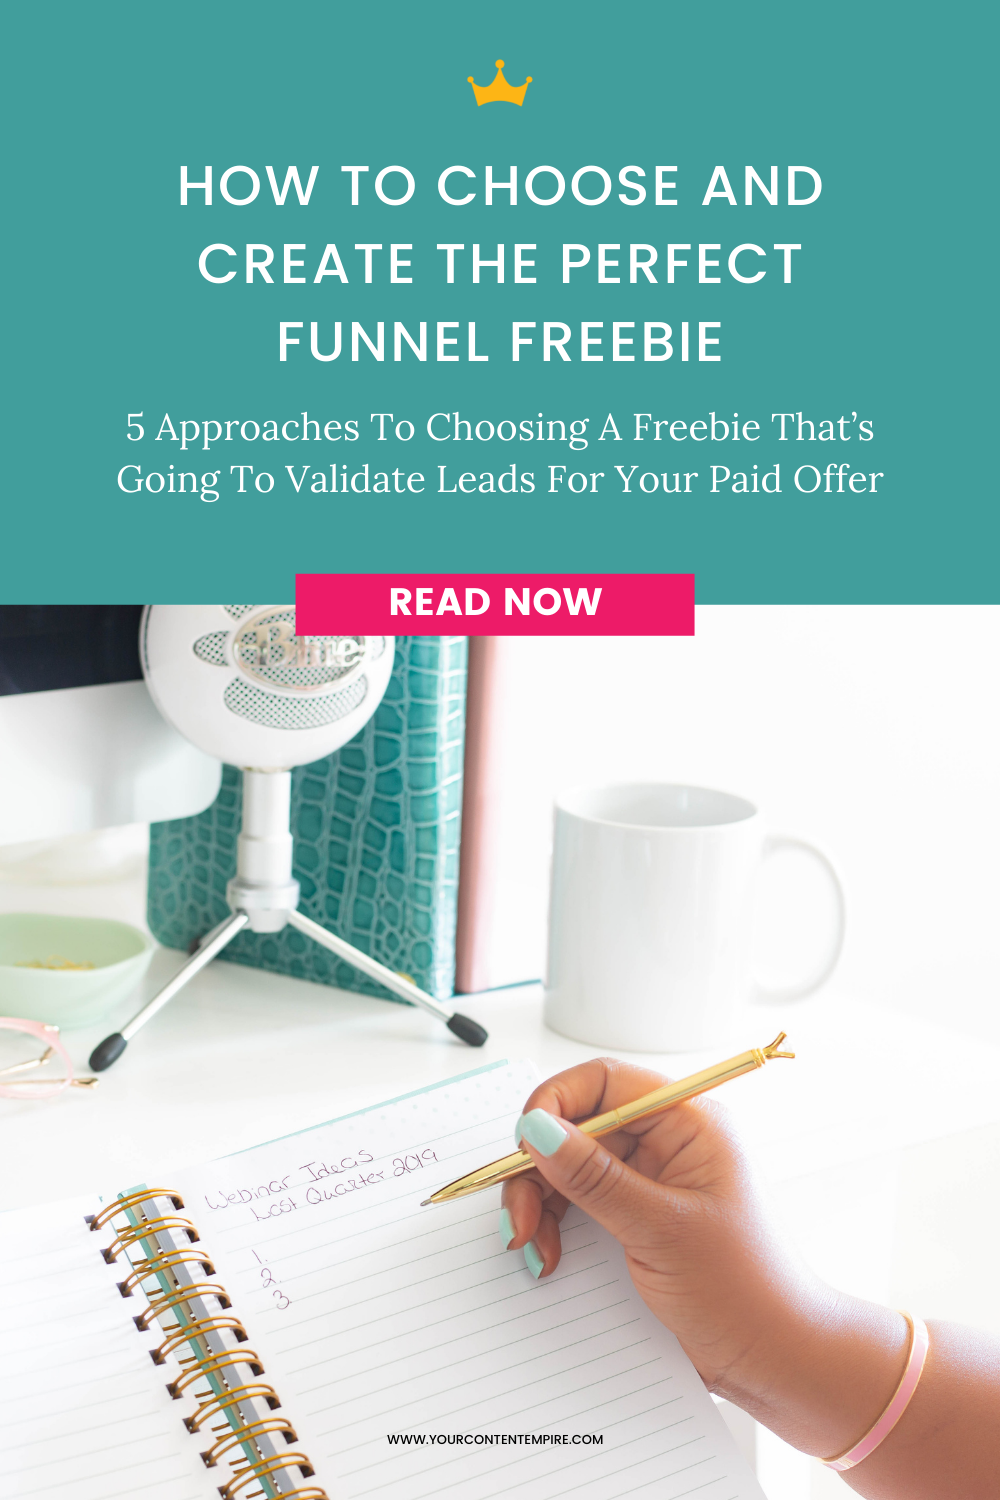 How to Choose and Create the Perfect Funnel Freebie